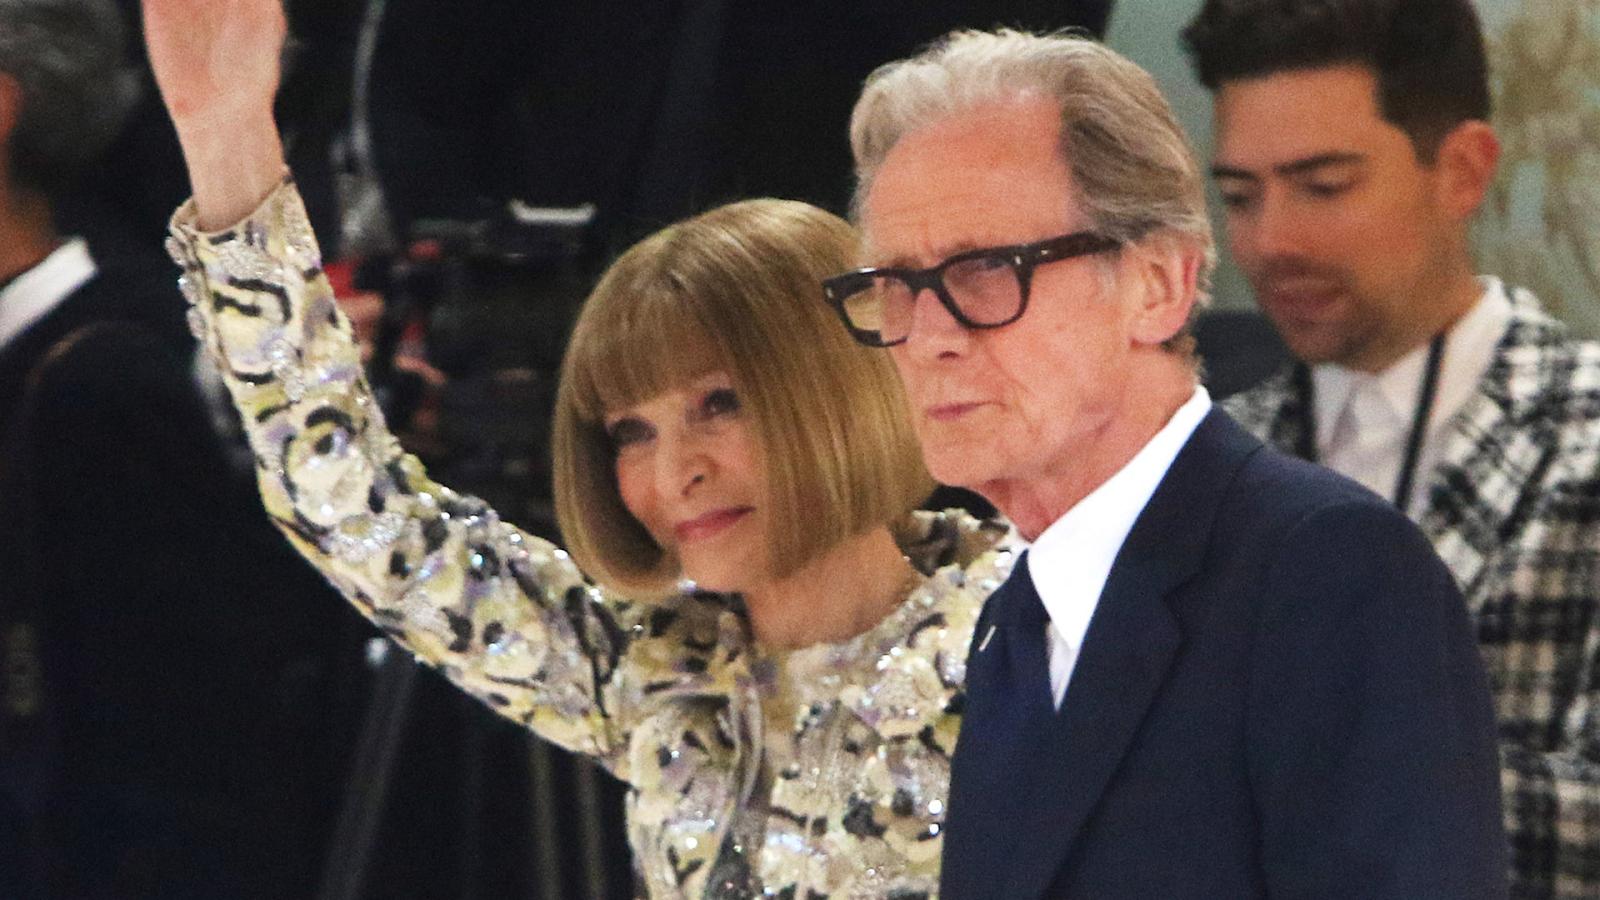 5 Reasons We Need Bill Nighy and Anna Wintour to Officially Date, ASAP! - image 1